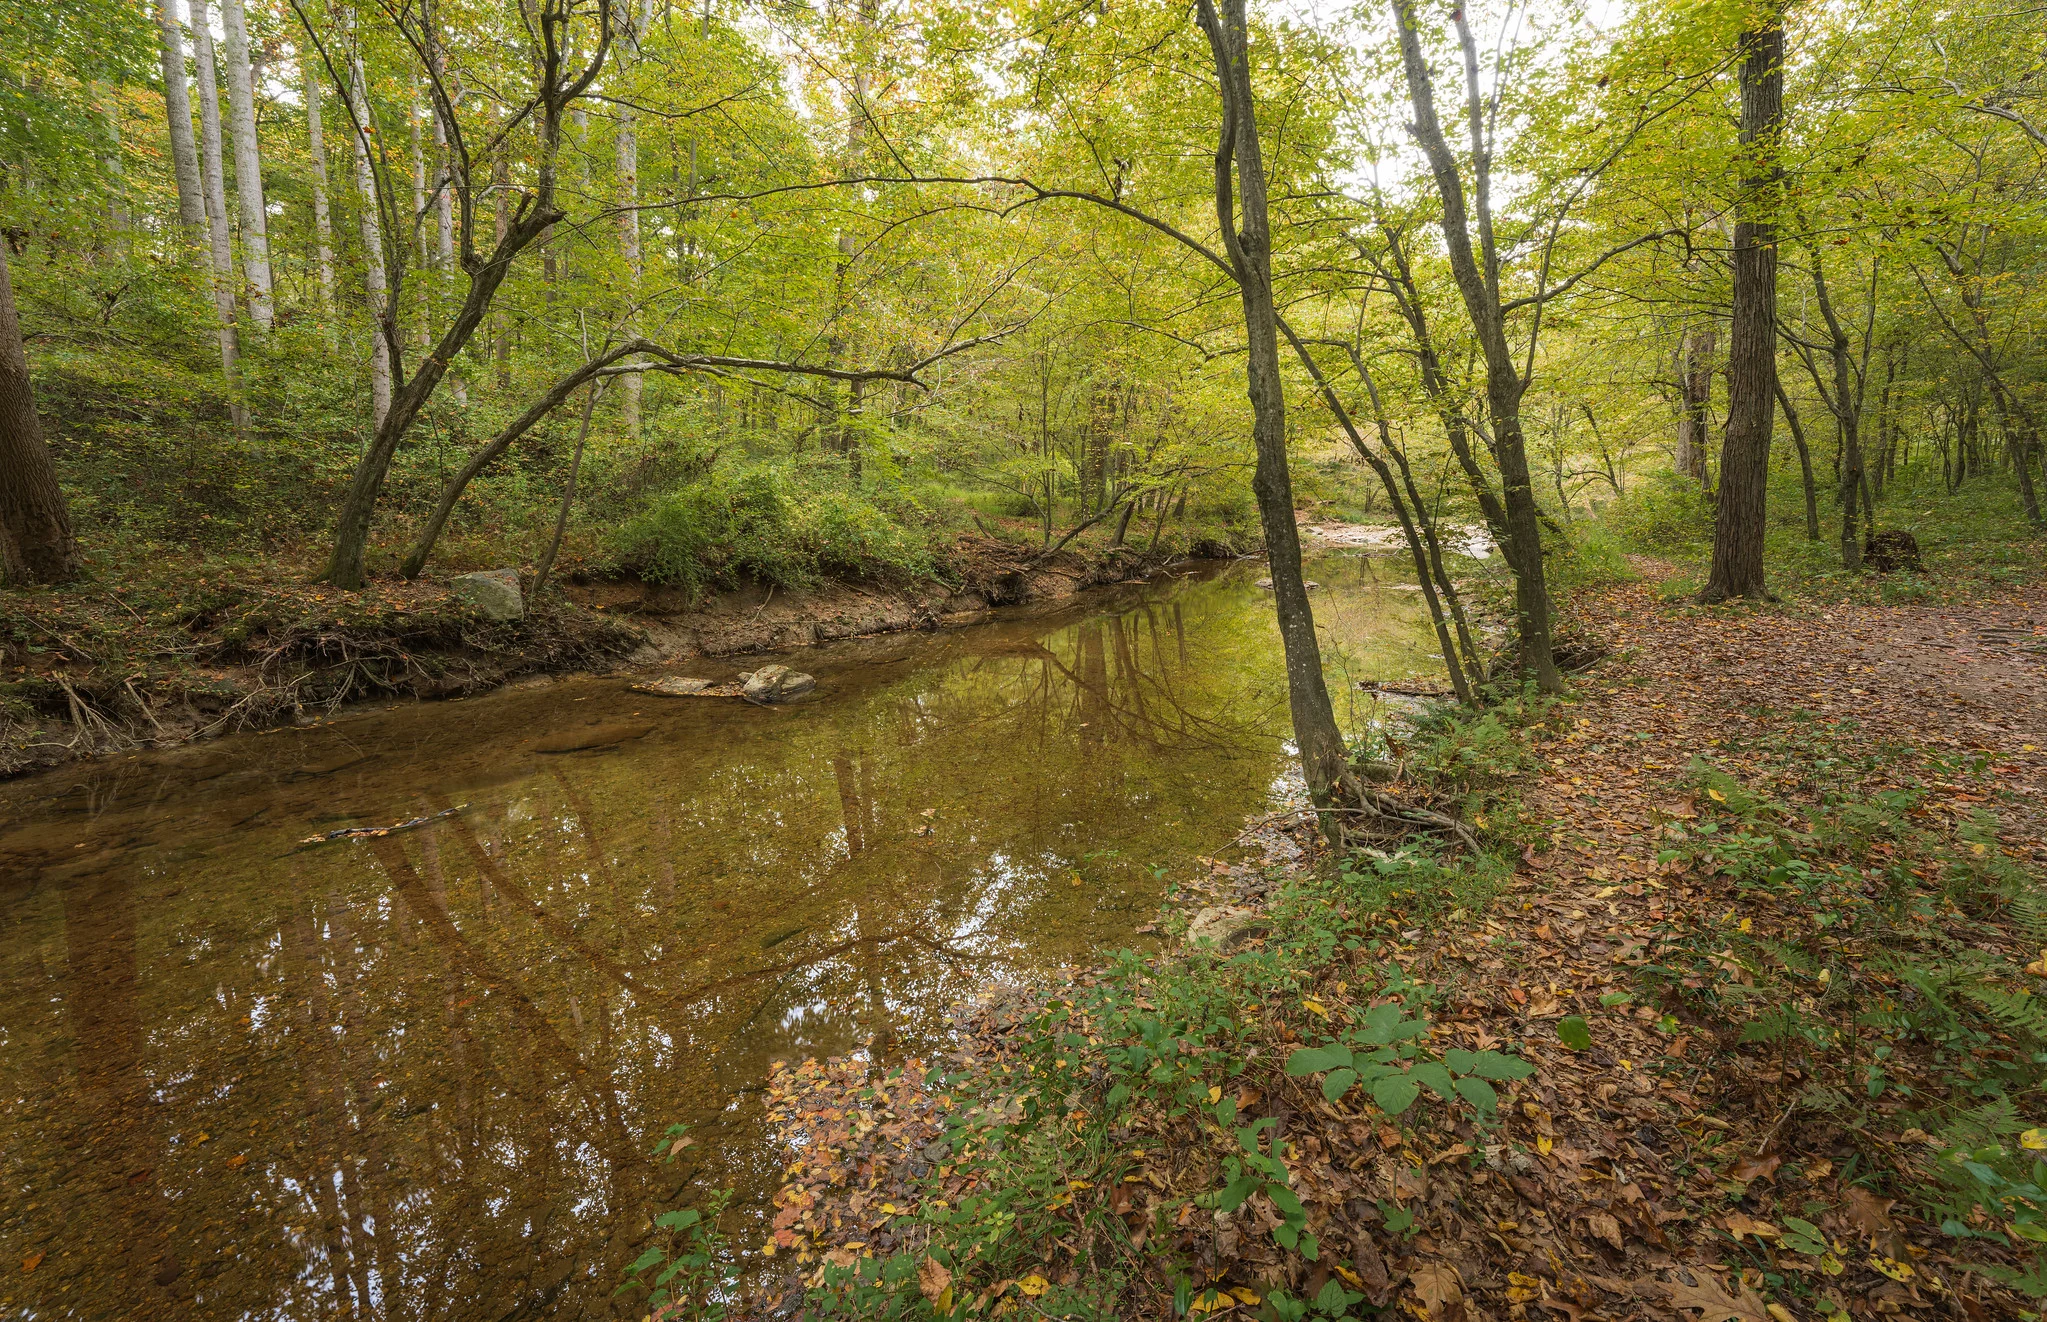 A peaceful stream (Rock Creek) winds through a mid-Atlantic forest in springtime.